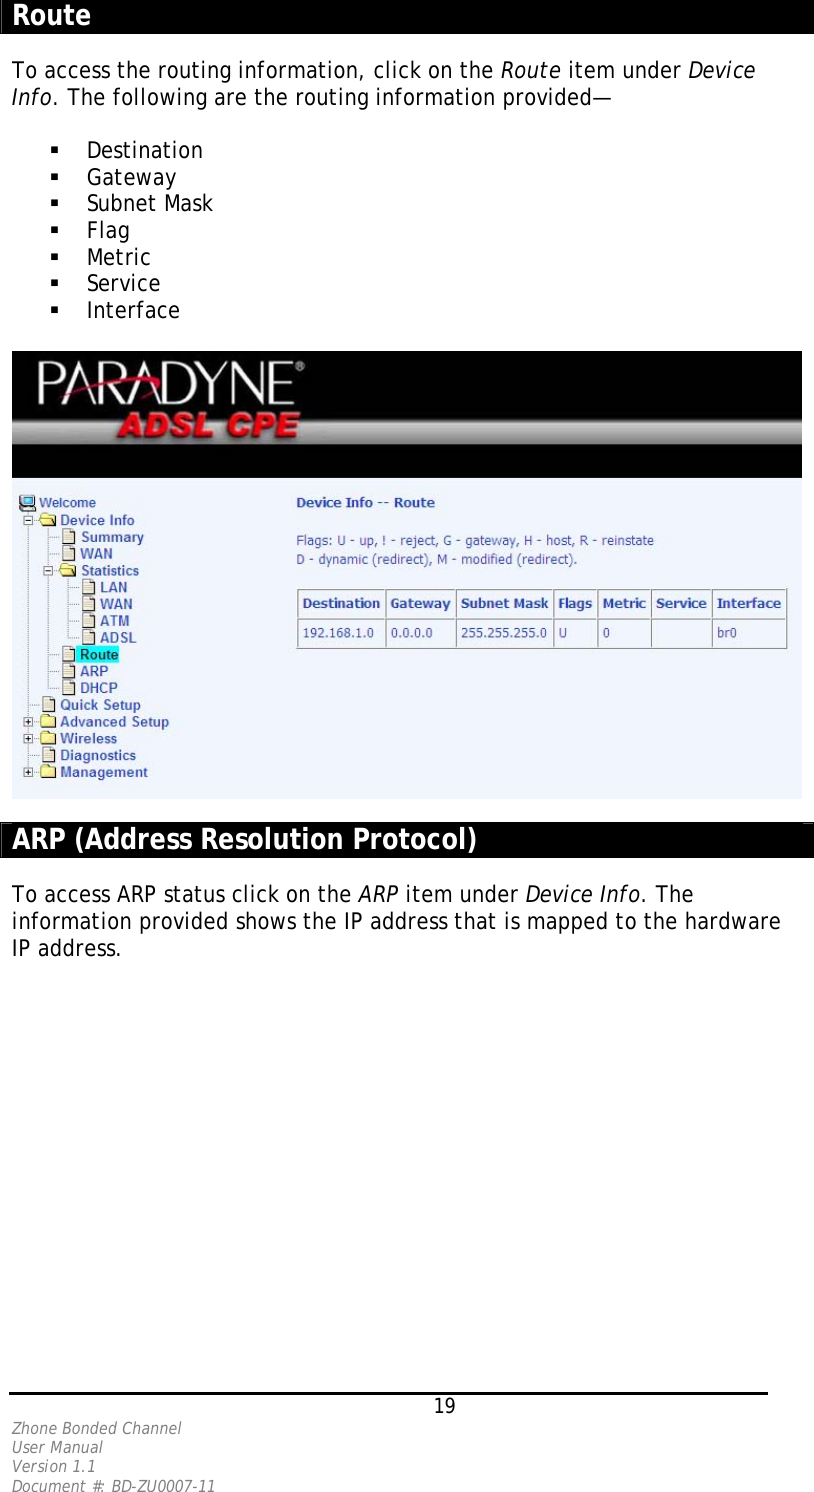  Route  To access the routing information, click on the Route item under Device Info. The following are the routing information provided—    Destination    Gateway   Subnet Mask    Flag   Metric   Service   Interface    ARP (Address Resolution Protocol)  To access ARP status click on the ARP item under Device Info. The information provided shows the IP address that is mapped to the hardware IP address.    19 Zhone Bonded Channel User Manual  Version 1.1 Document #: BD-ZU0007-11 